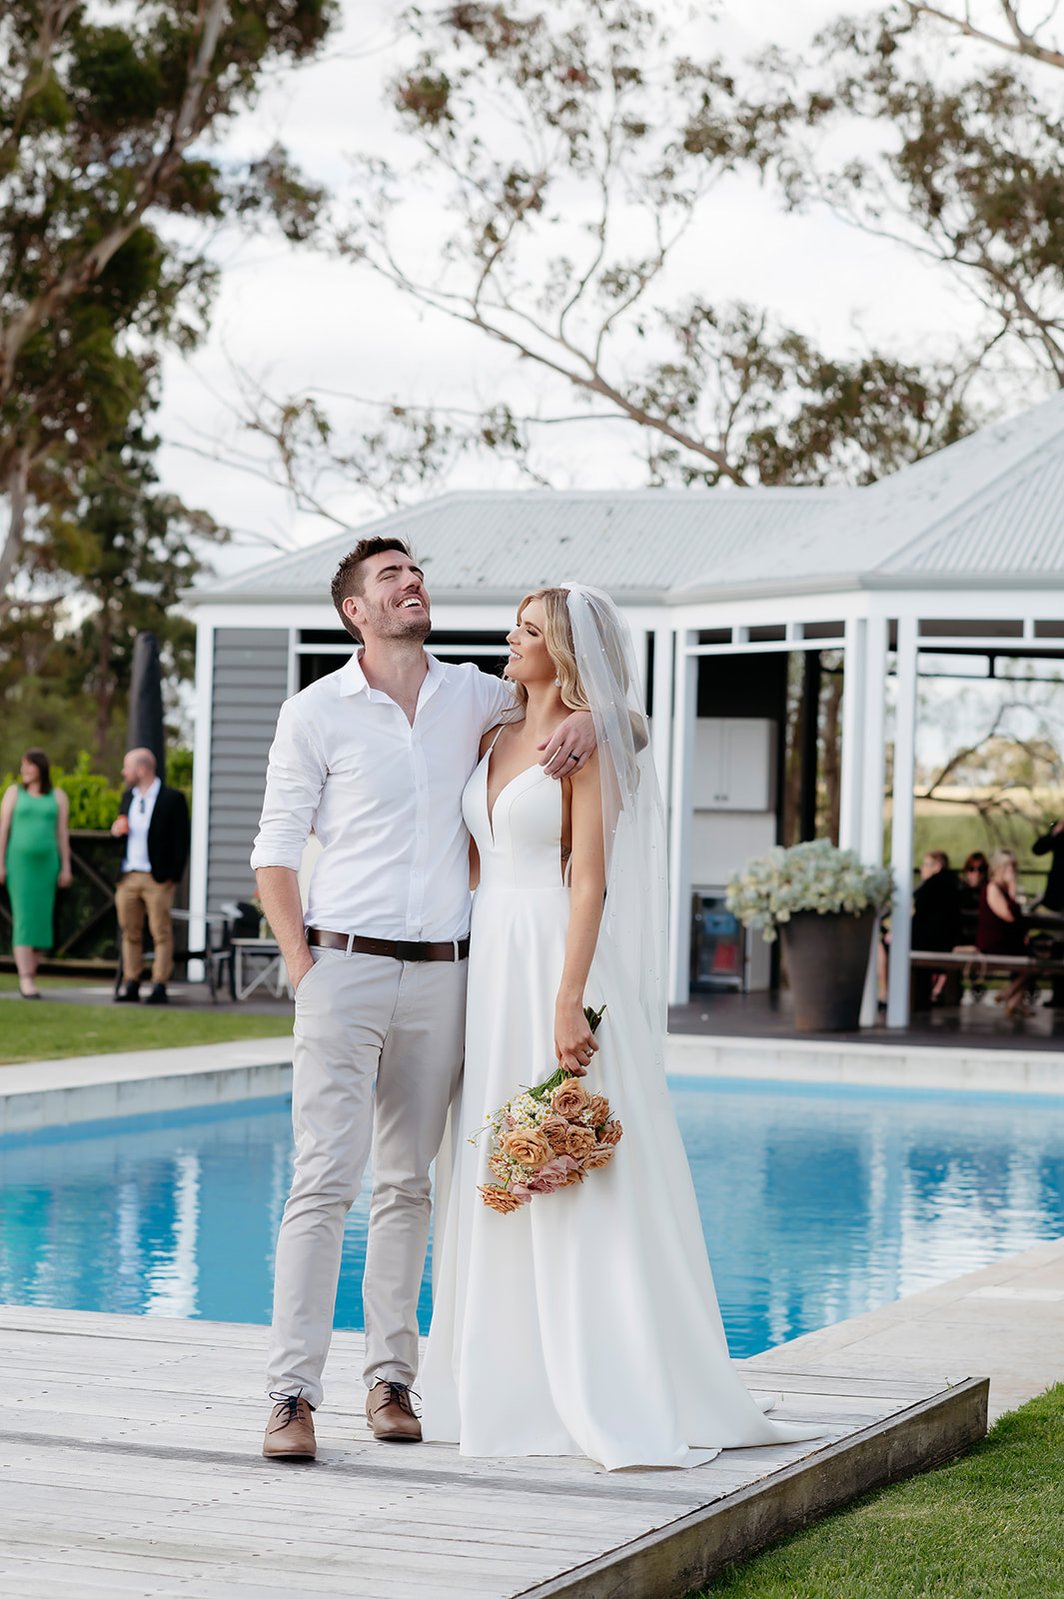 Bride and groom laughing posed in front of a pool outside